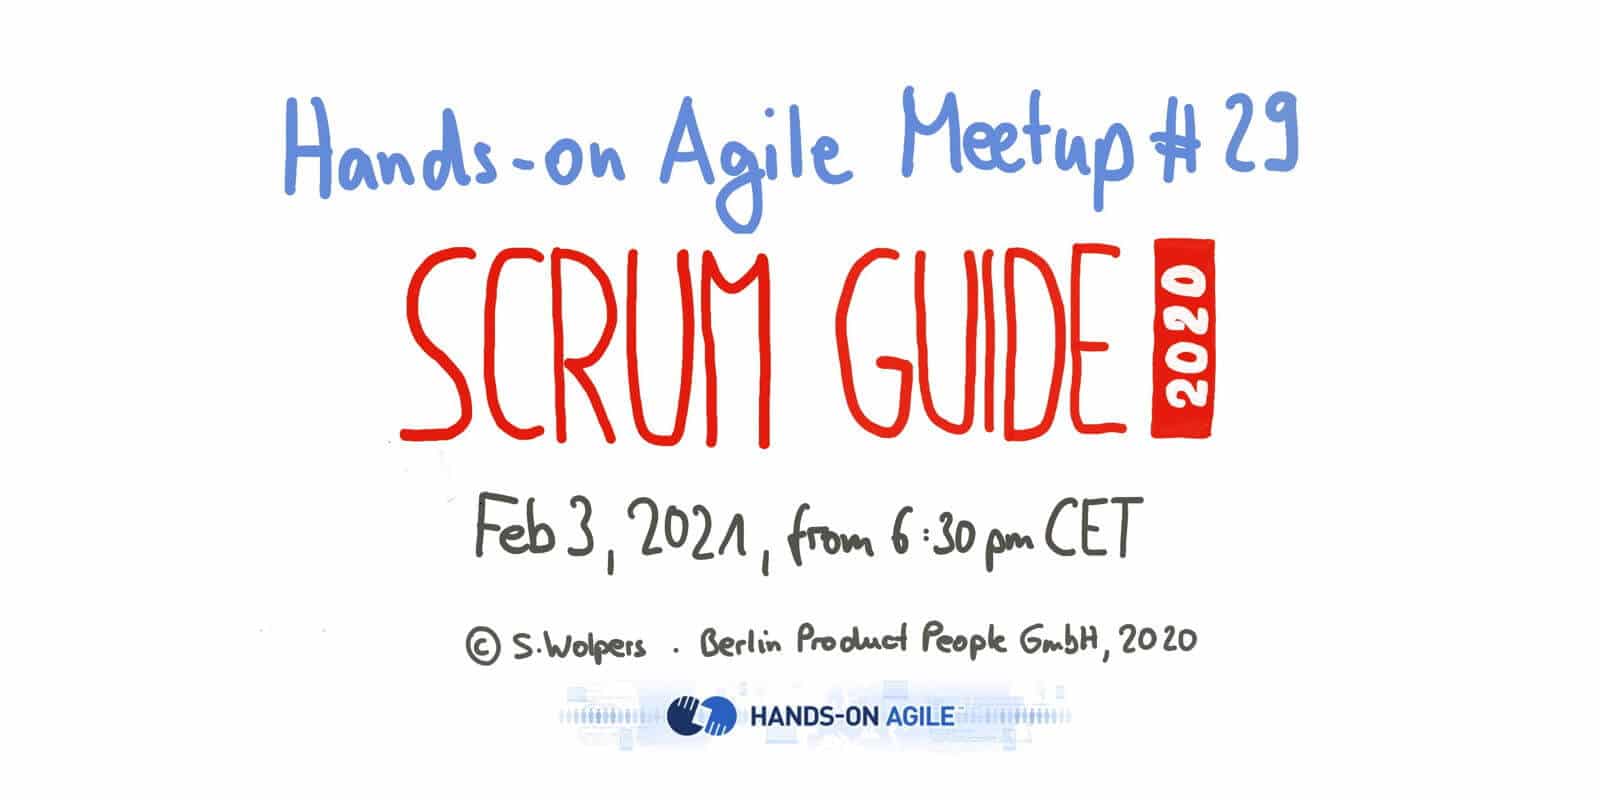 Hands-on Agile #29: Scrum Guide 2020 — Reloaded — February 3, 2021